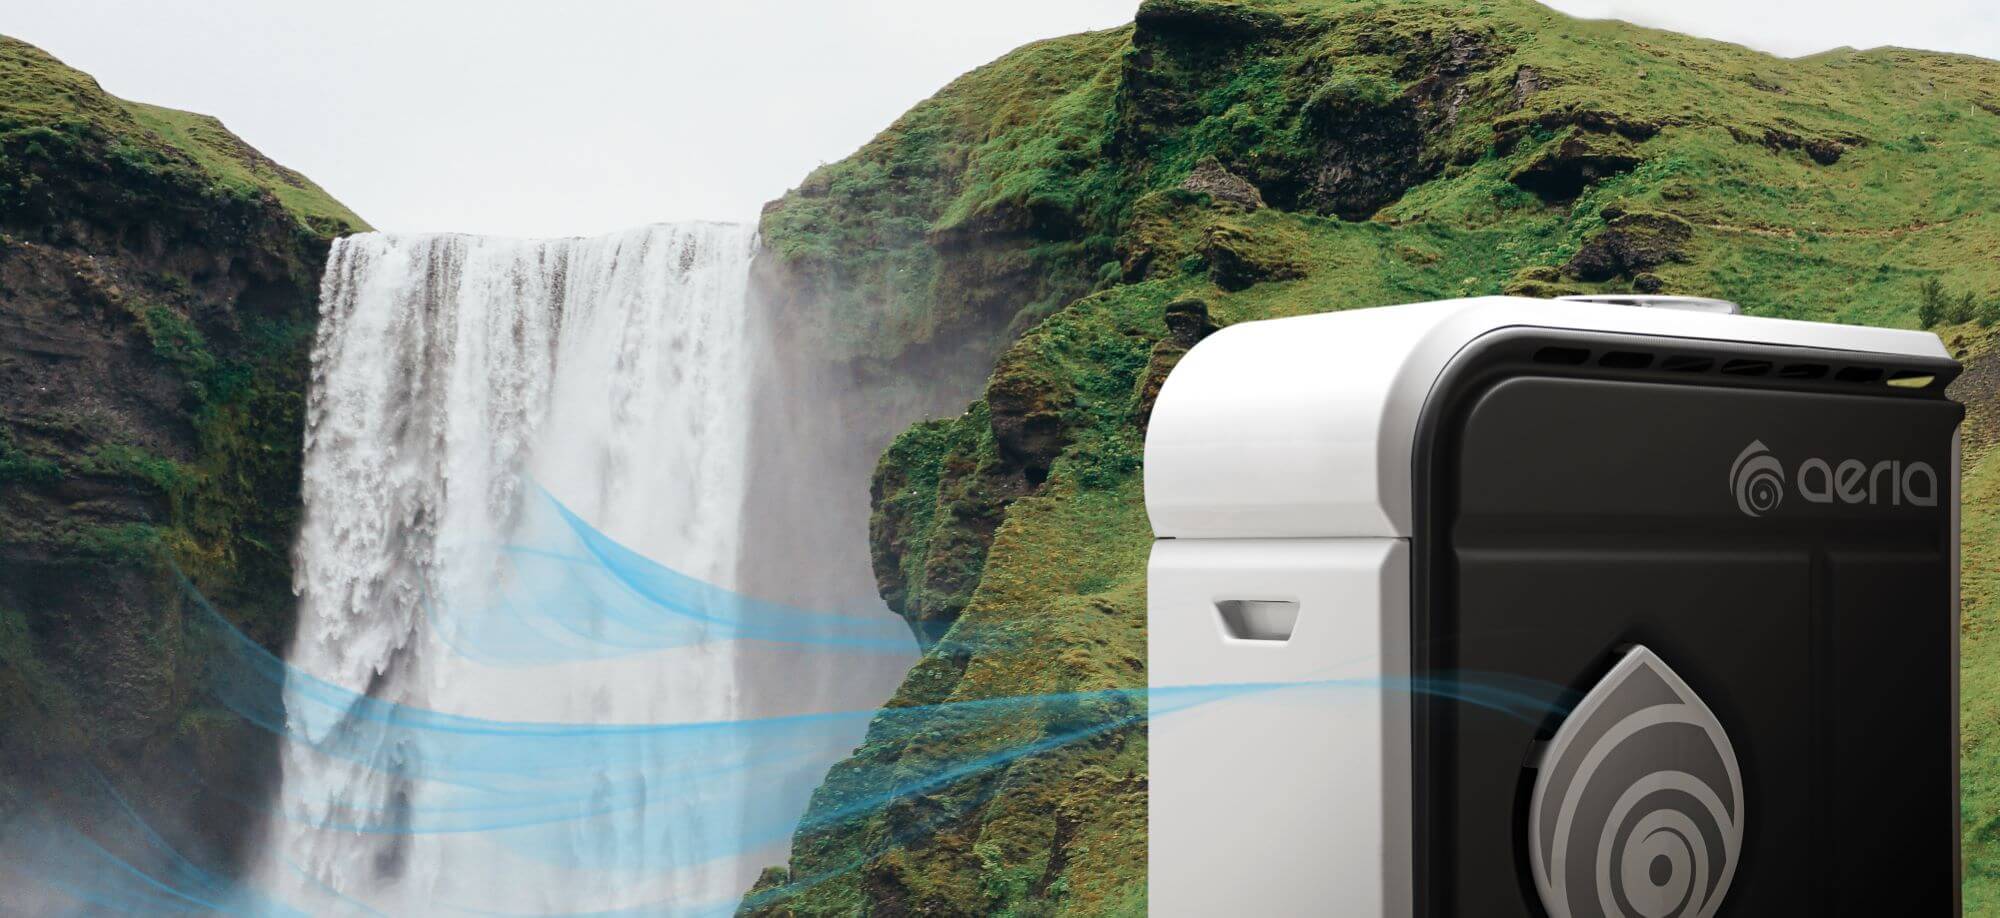 AERIA is the appliance that washes the air 